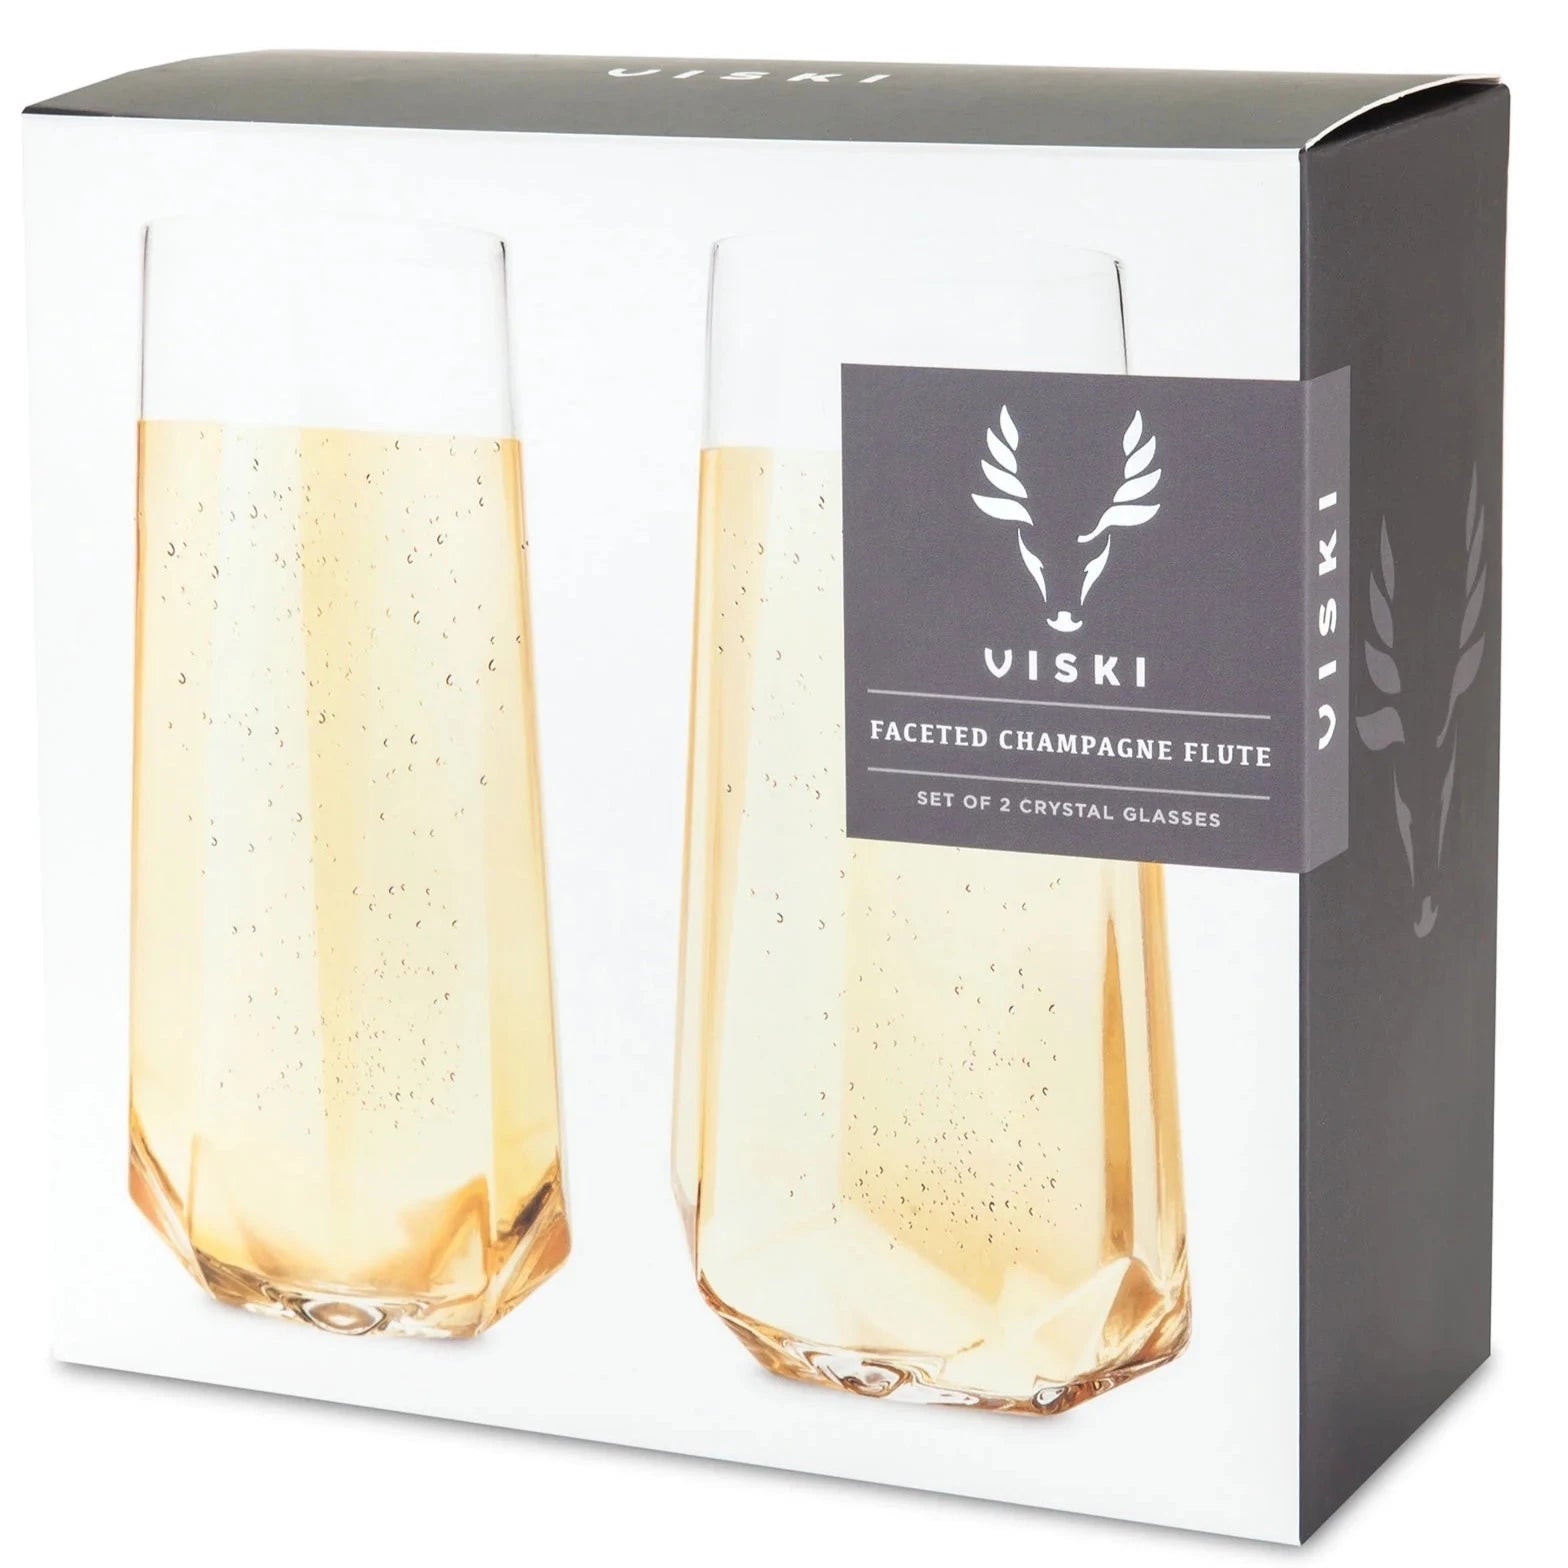 Packaging for Faceted Crystal Stemless Champagne Flutes